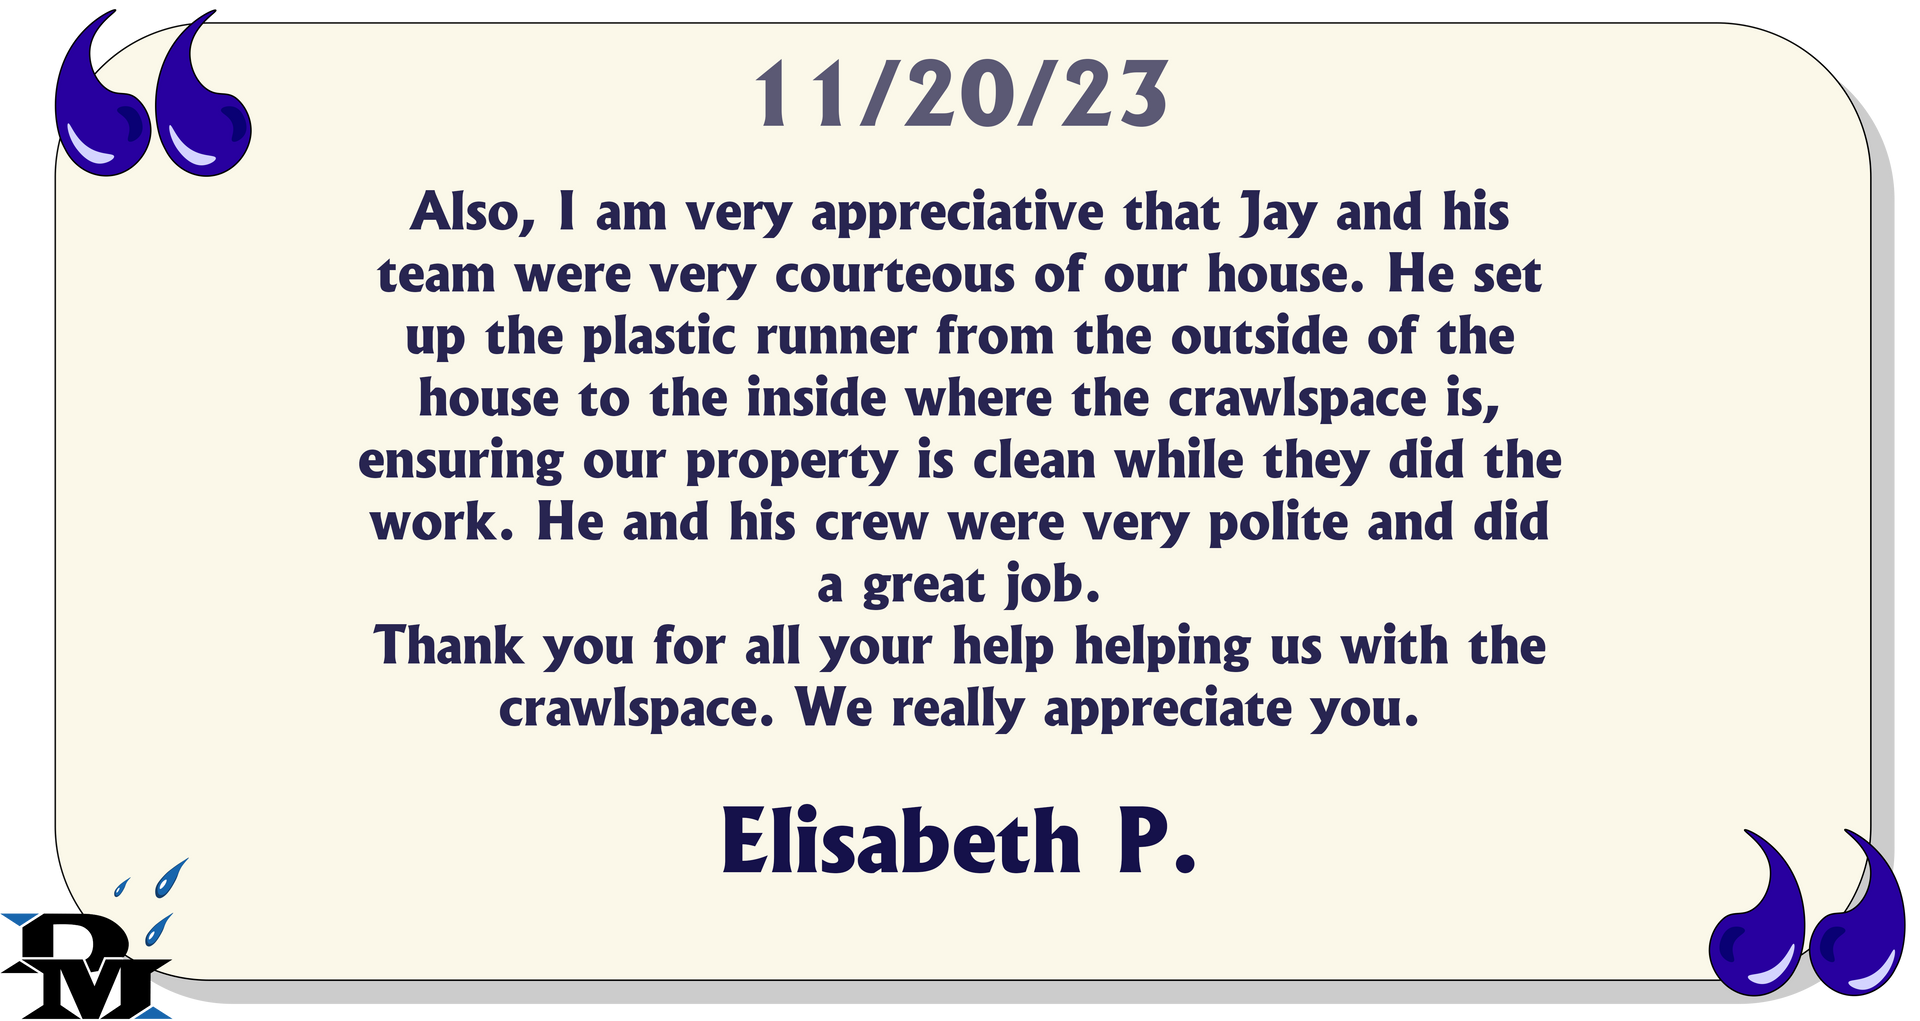 Also, I am very appreciative that Jay and his team were very courteous of our house. He set up the plastic runner from the outside of the house to the inside where the crawlspace is...